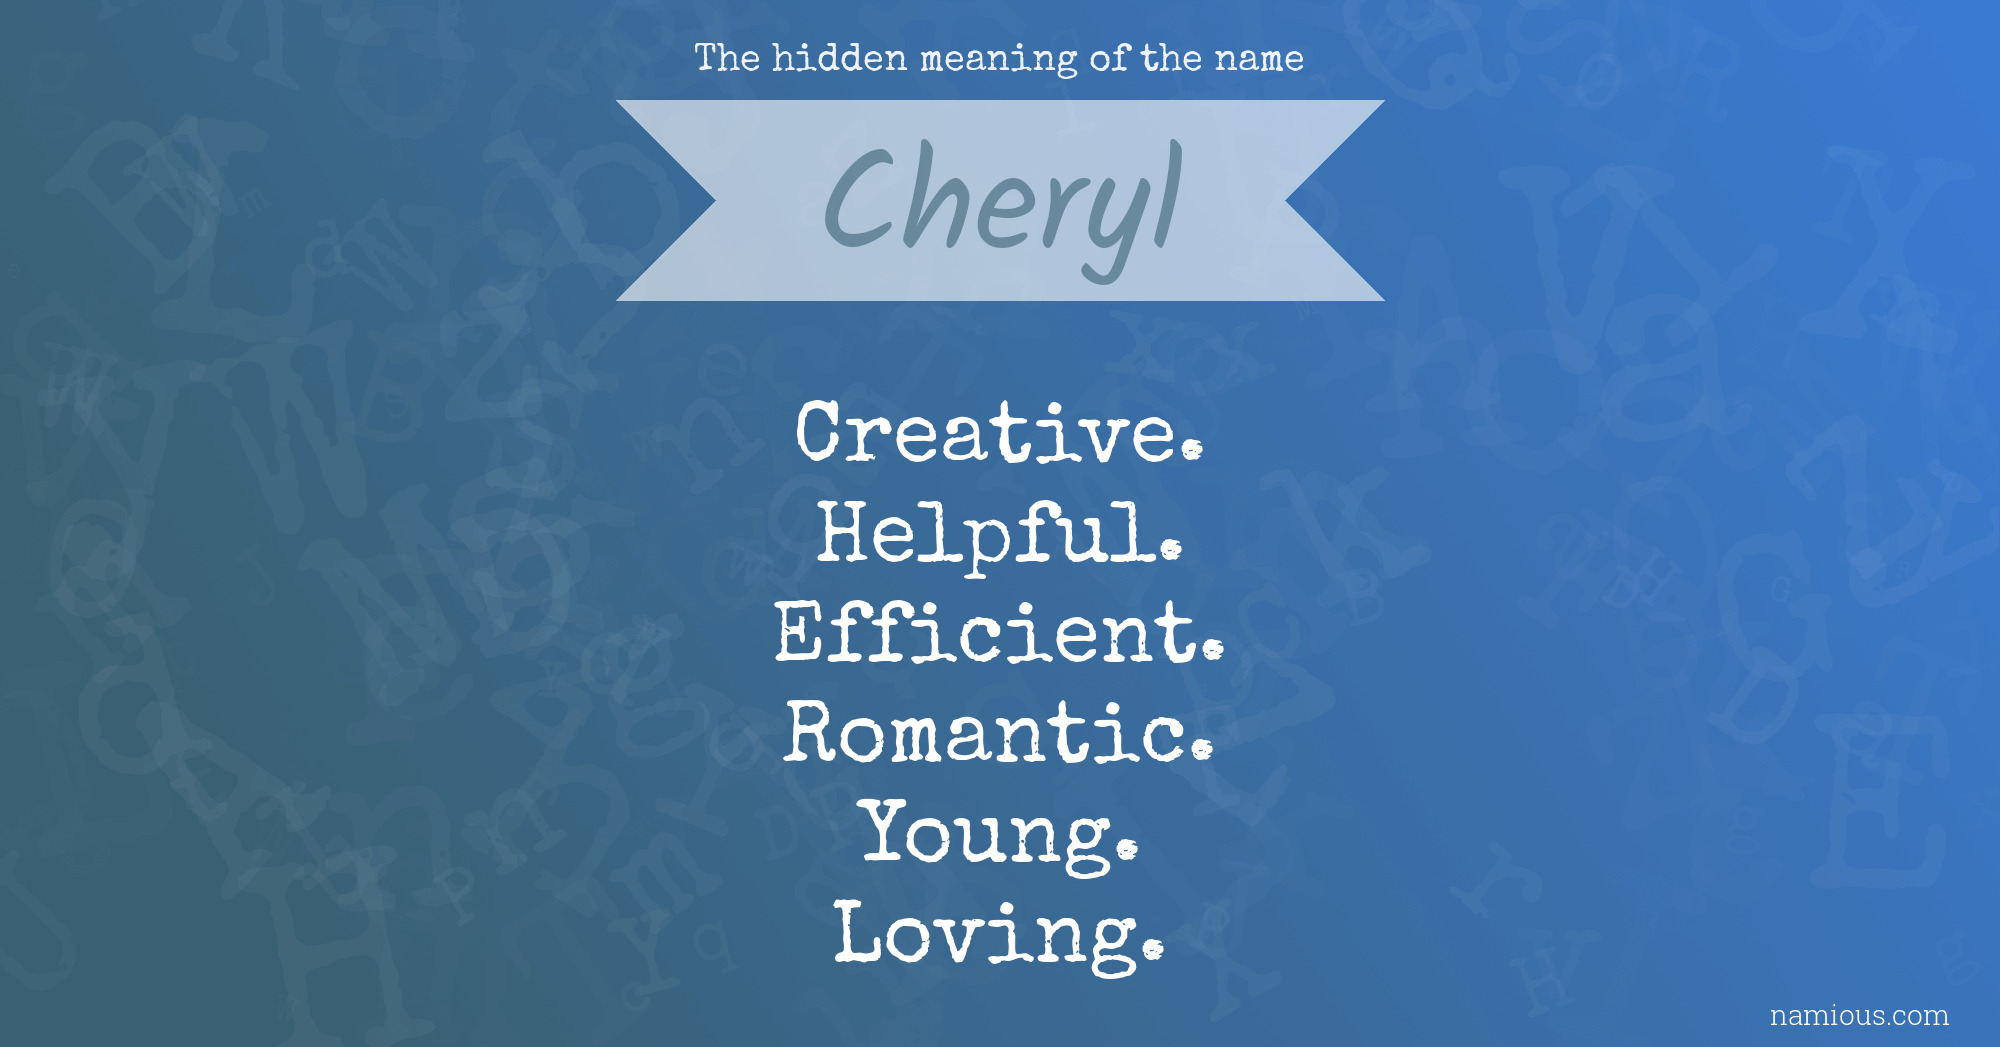 The hidden meaning of the name Cheryl